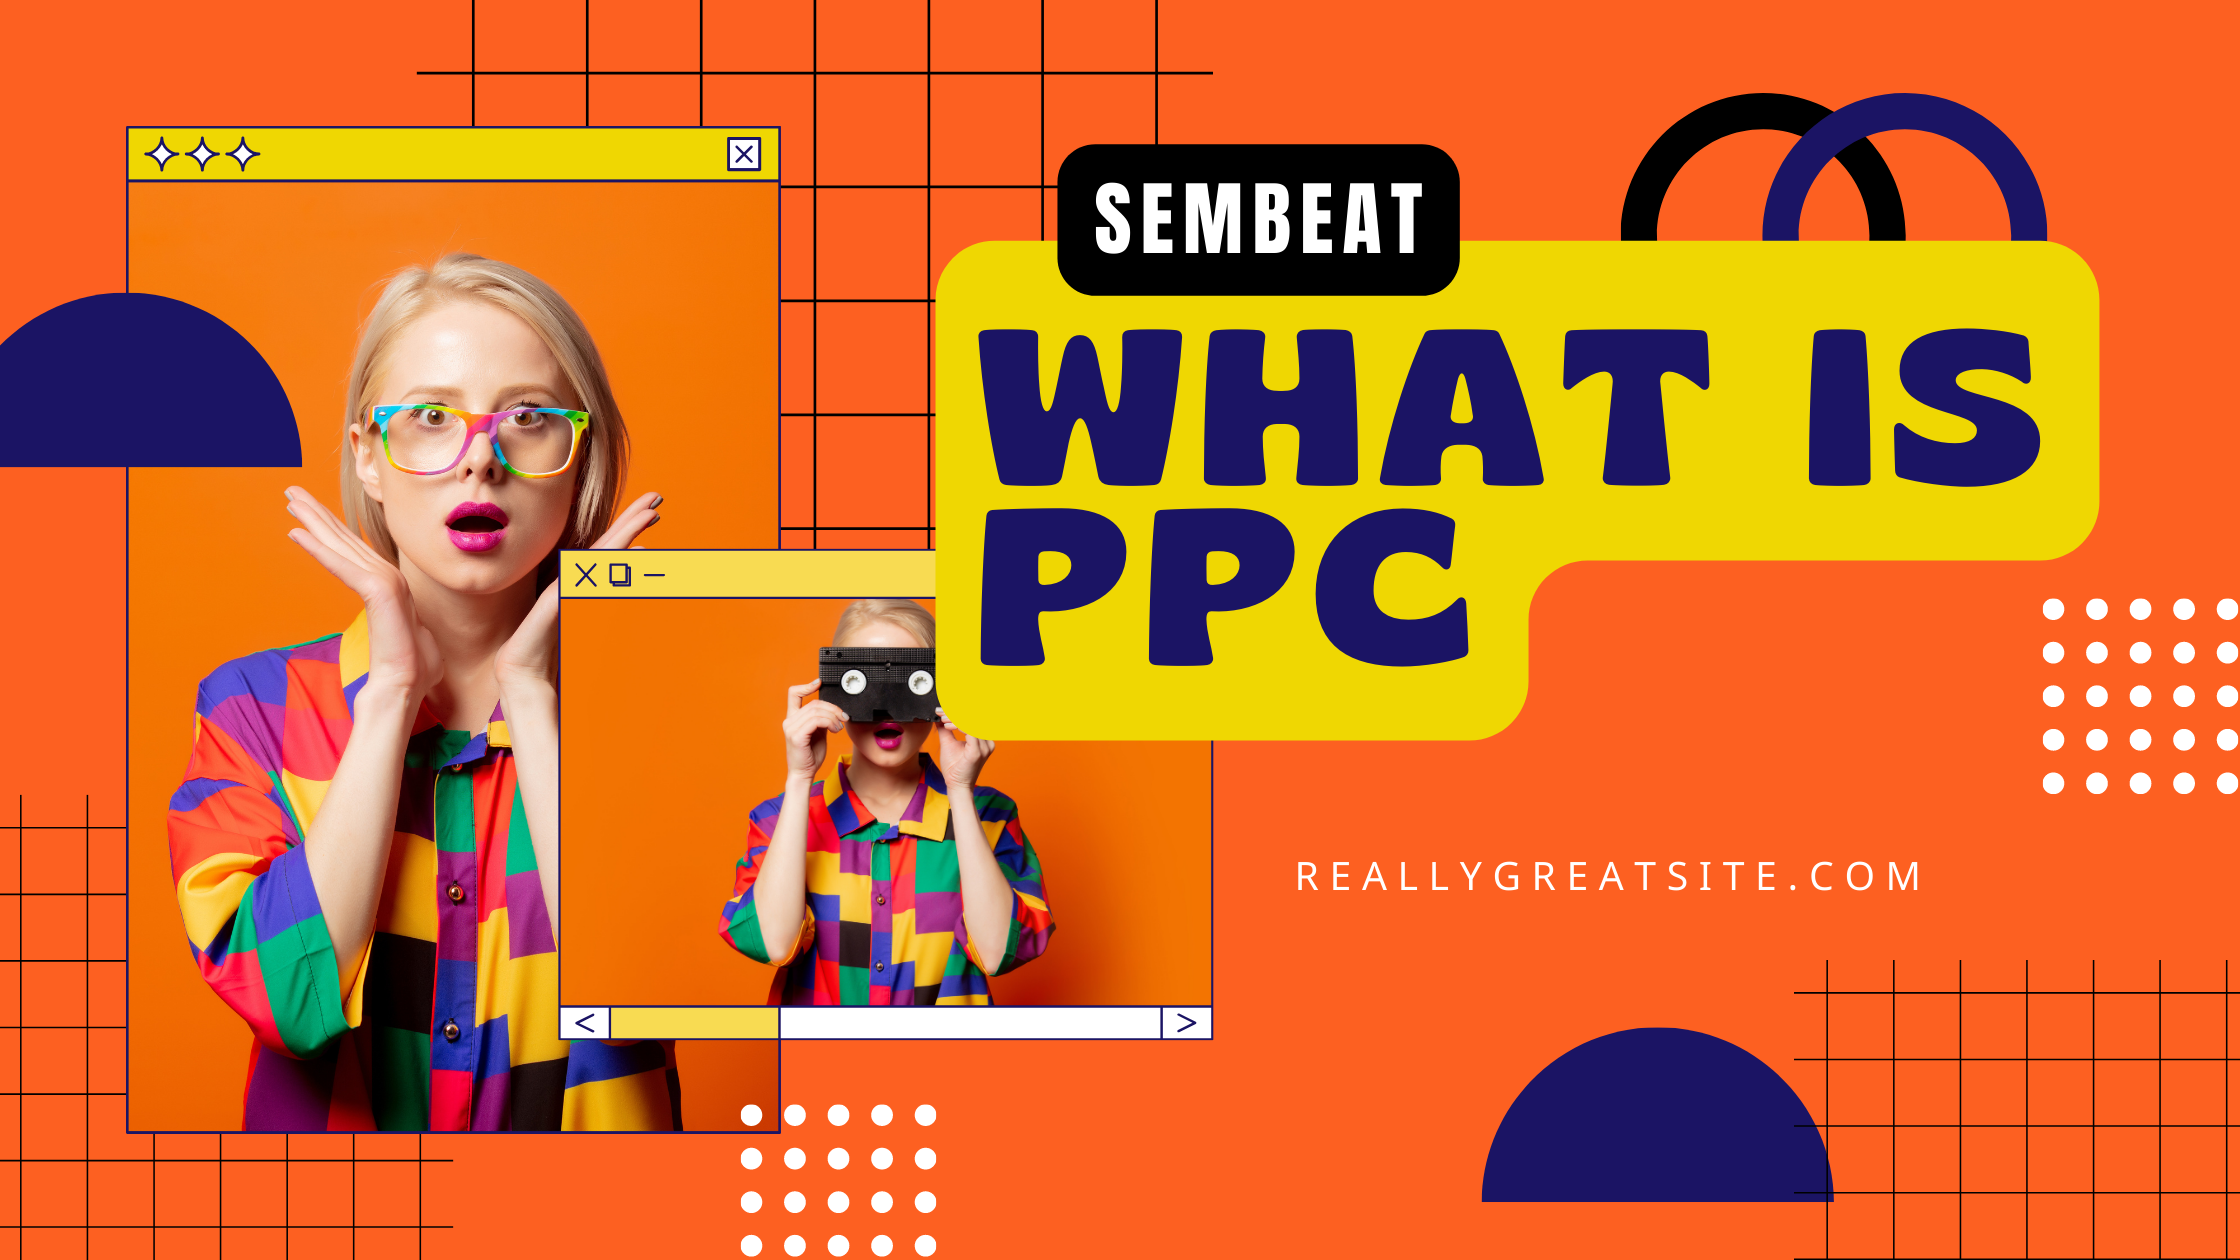 SEMBEAT - What is PPC